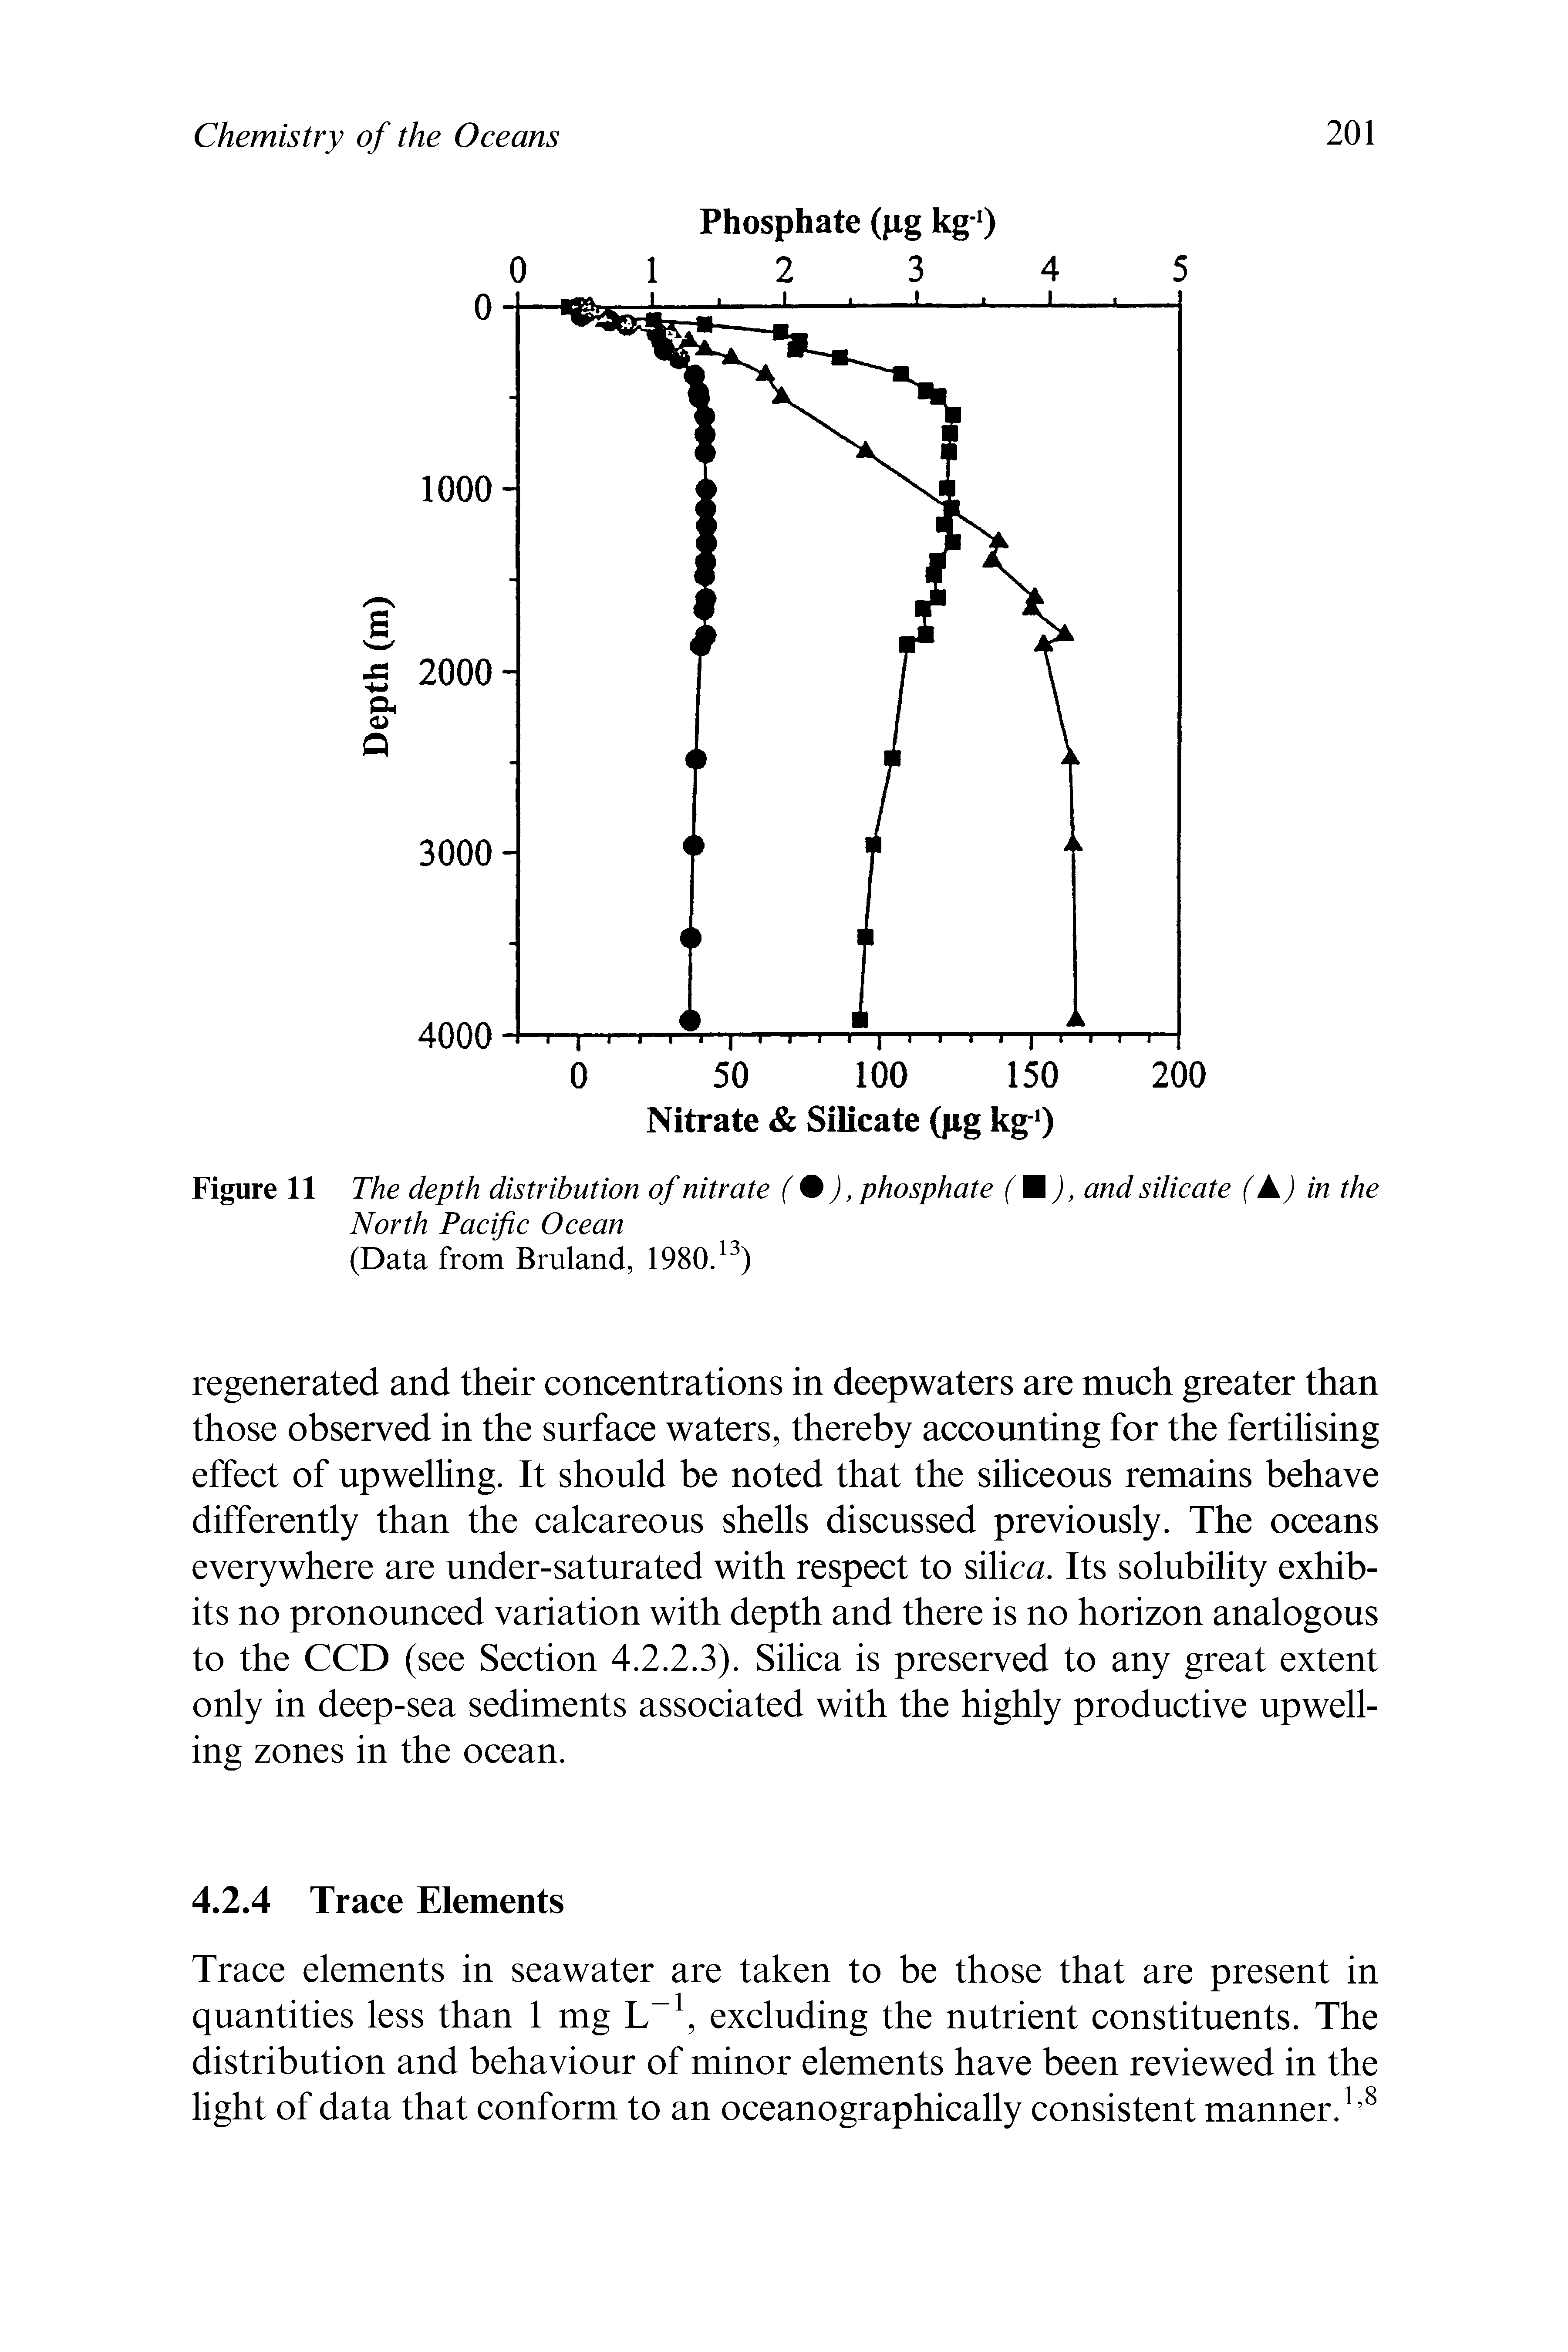 Figure 11 The depth distribution of nitrate ( ), phosphate f and silicate (A) in the North Pacific Ocean (Data from Bruland, 19802 )...